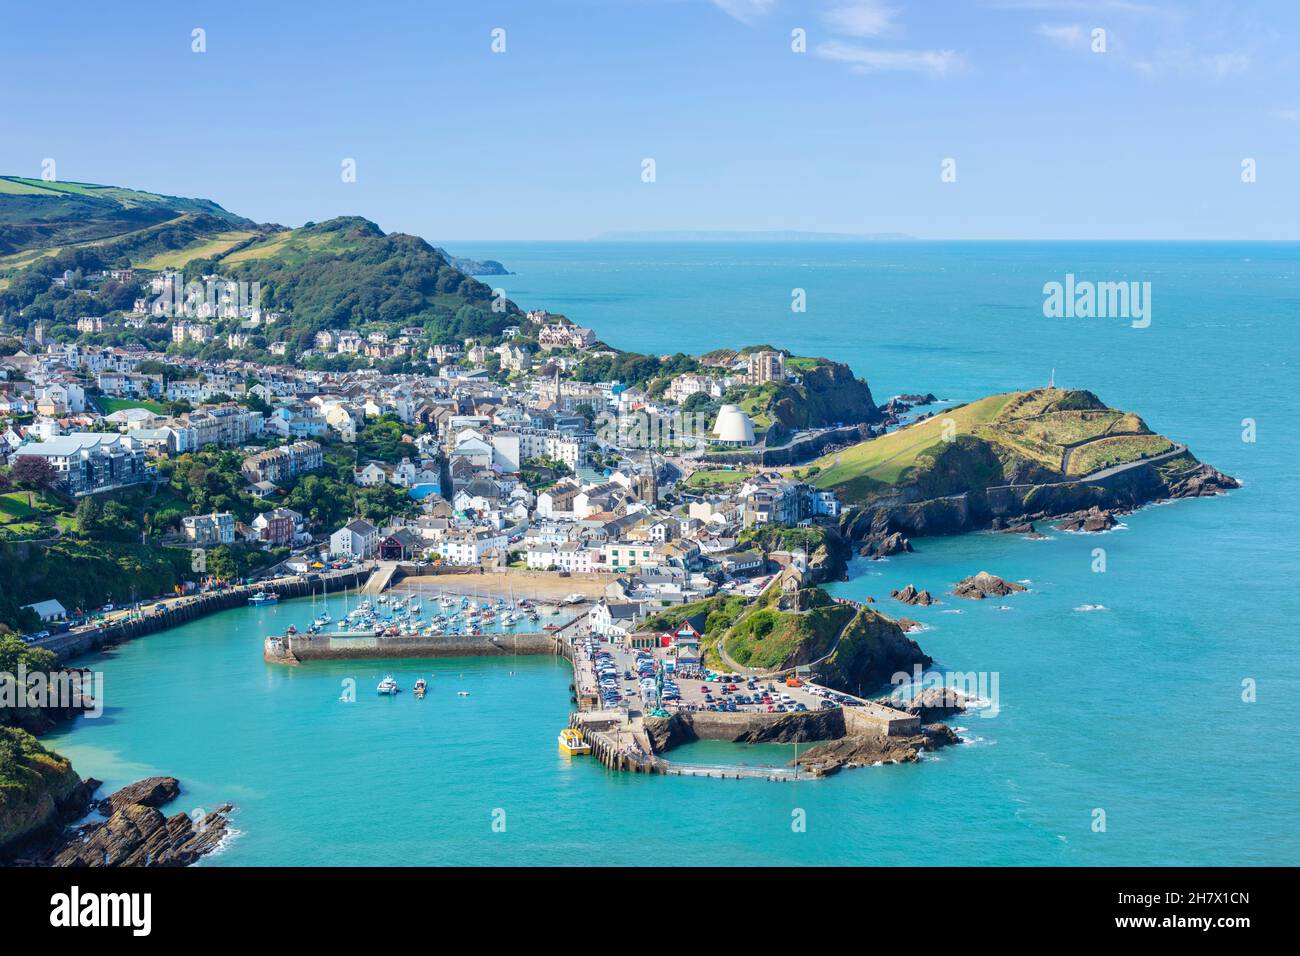 Spectacular views of the coast and harbour at Ilfracombe from the south west coast path above the town of Ilfracombe Devon England UK GB Europe Stock Photo